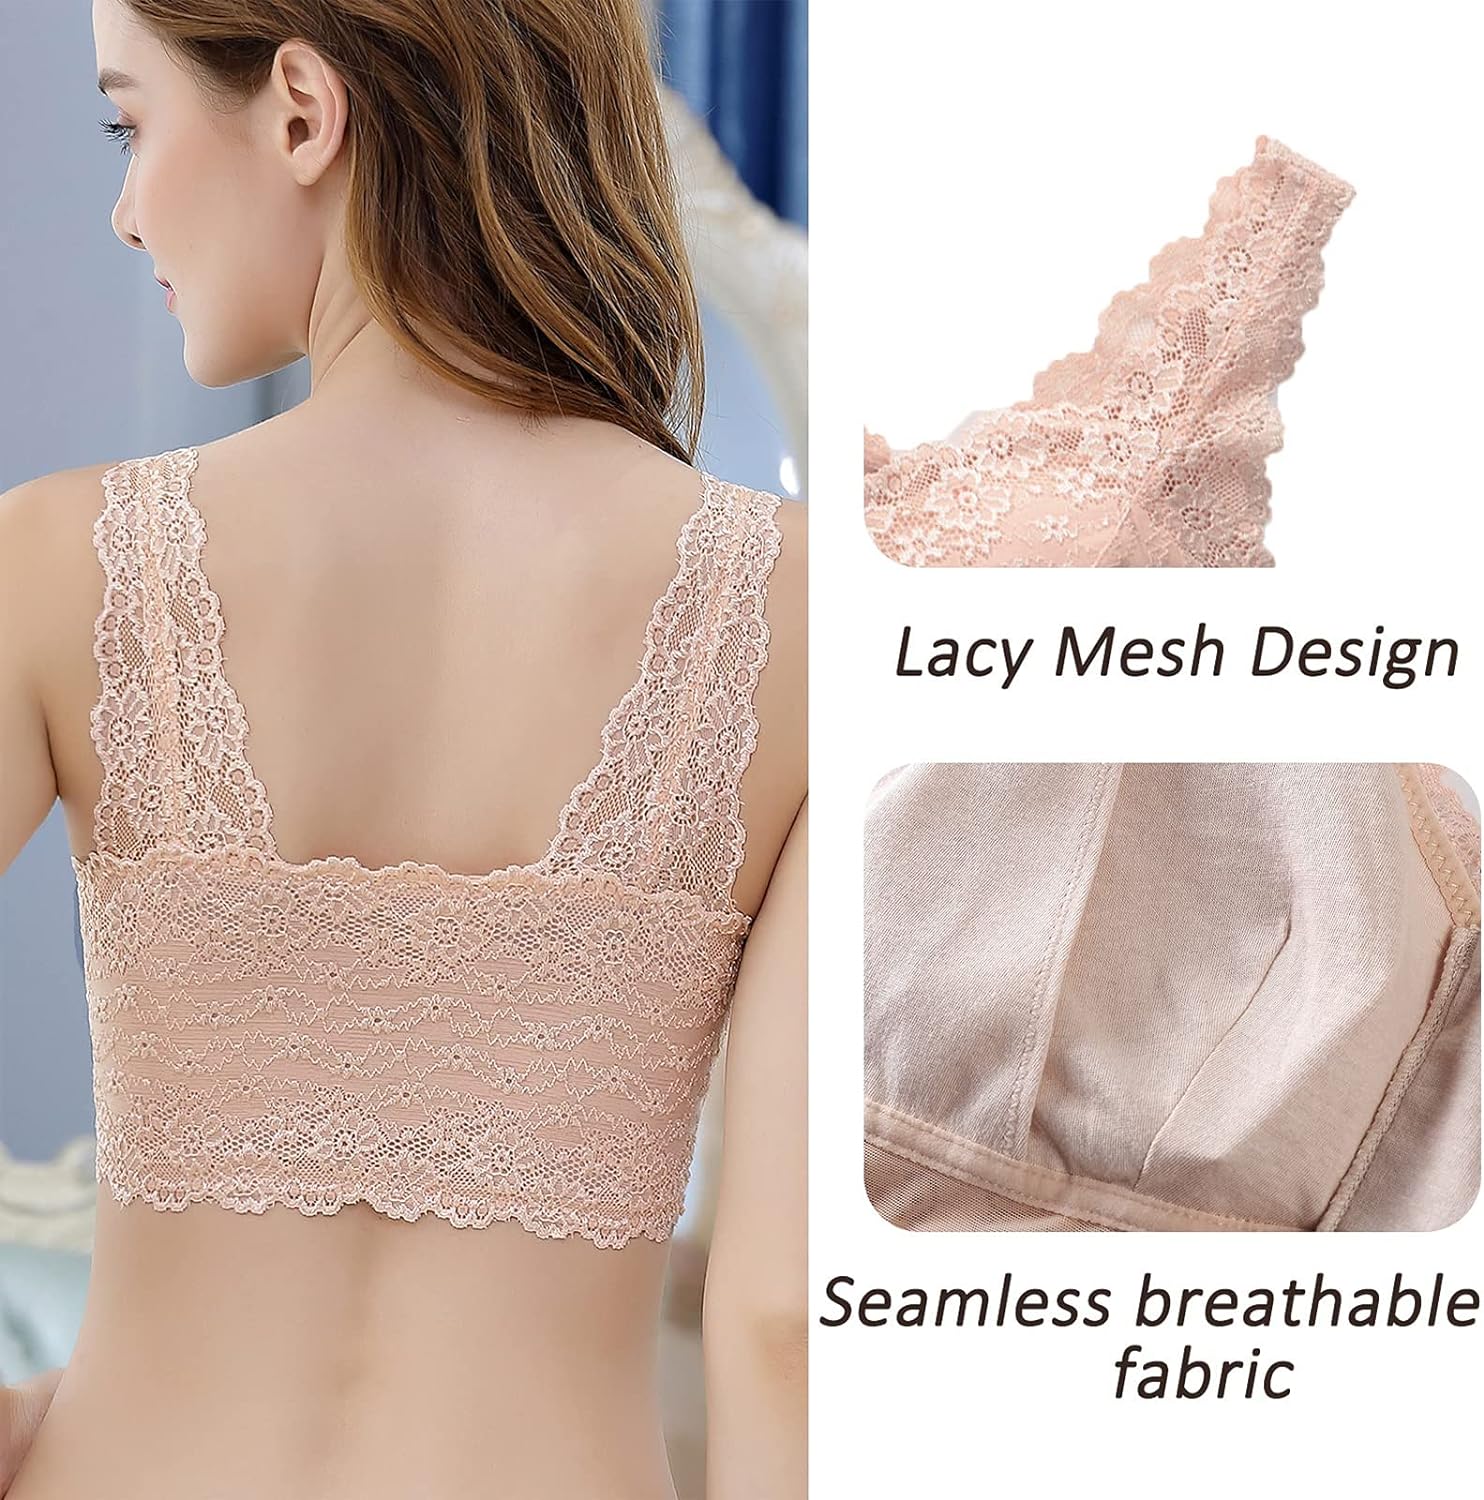 3. Lacy Mesh Design 4. Seamless breathable fabric